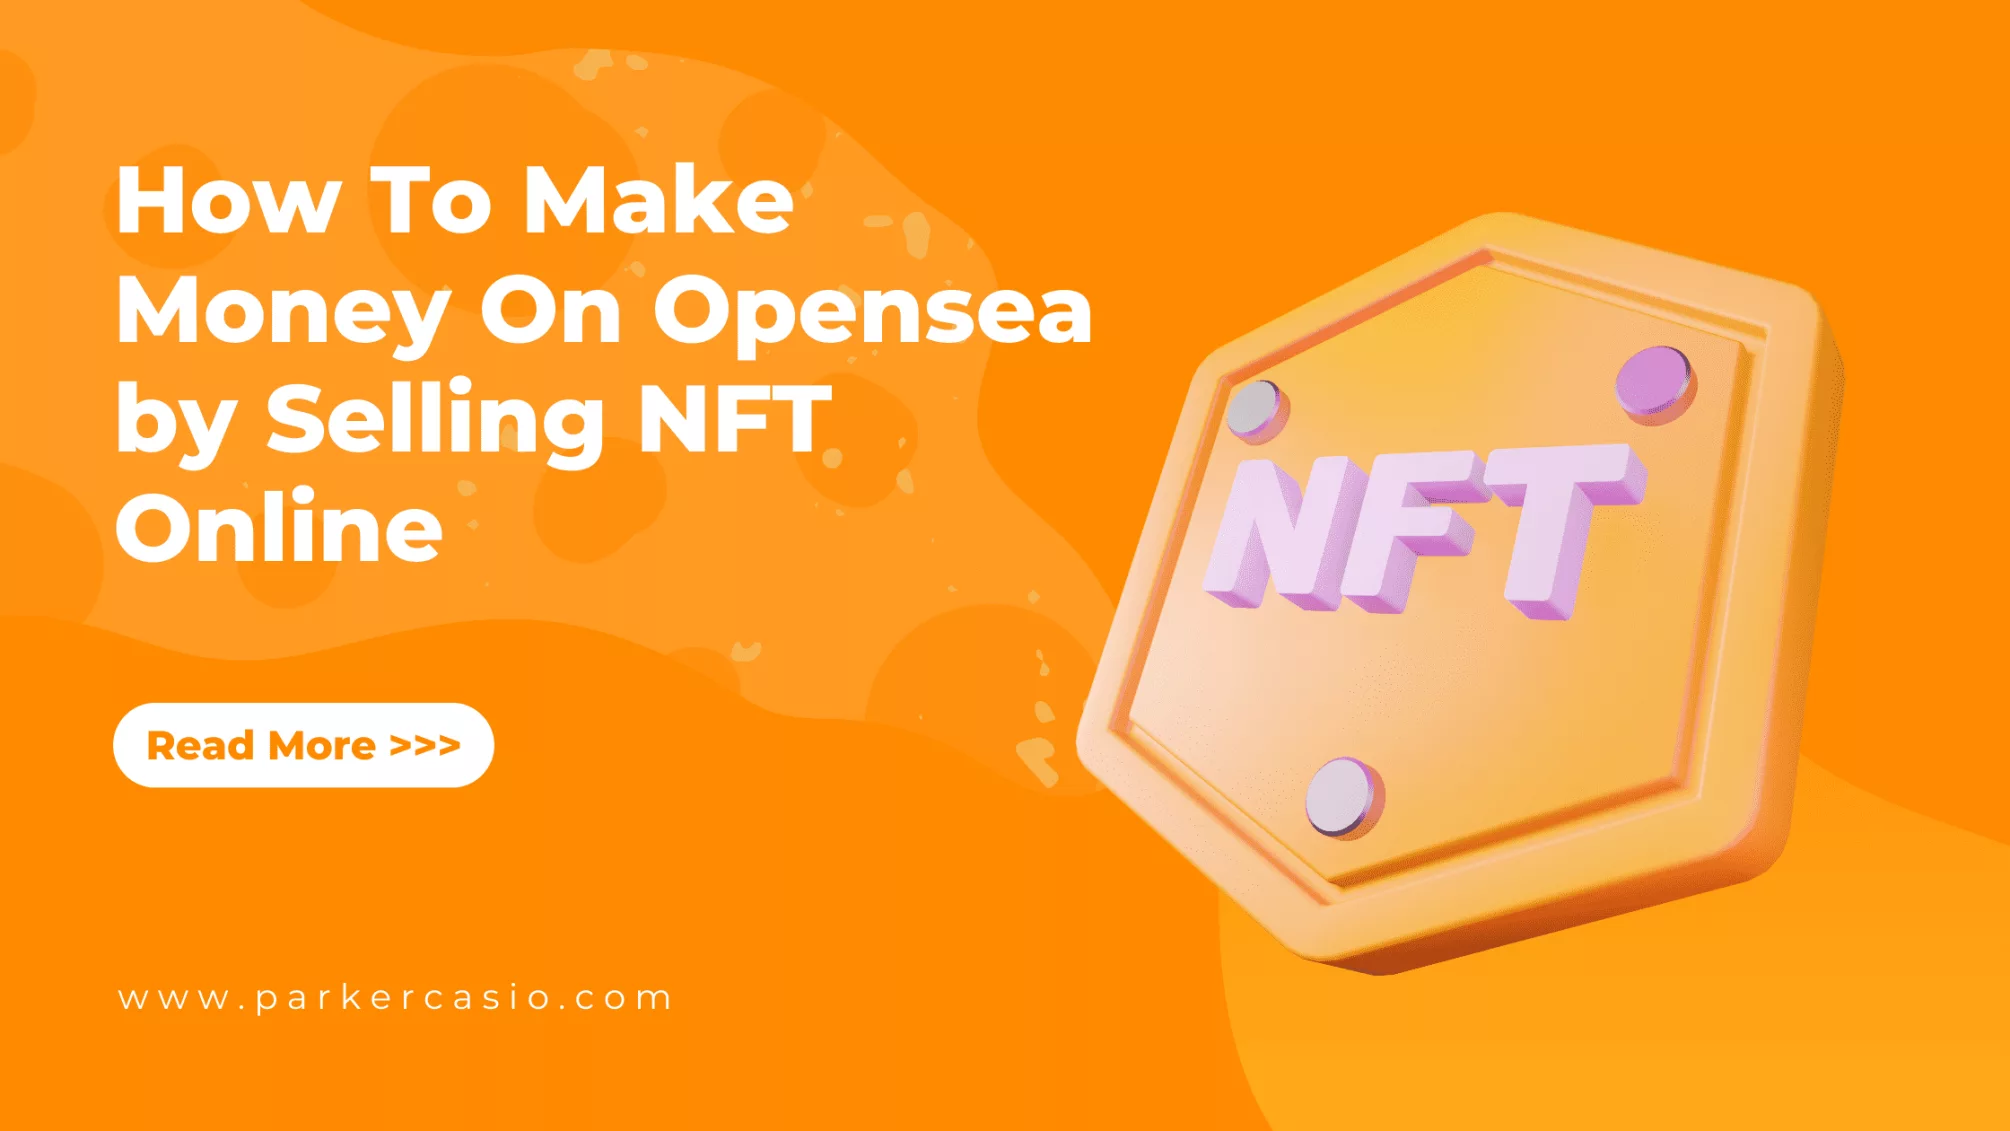 How To Make Money On Opensea by Selling NFT Online